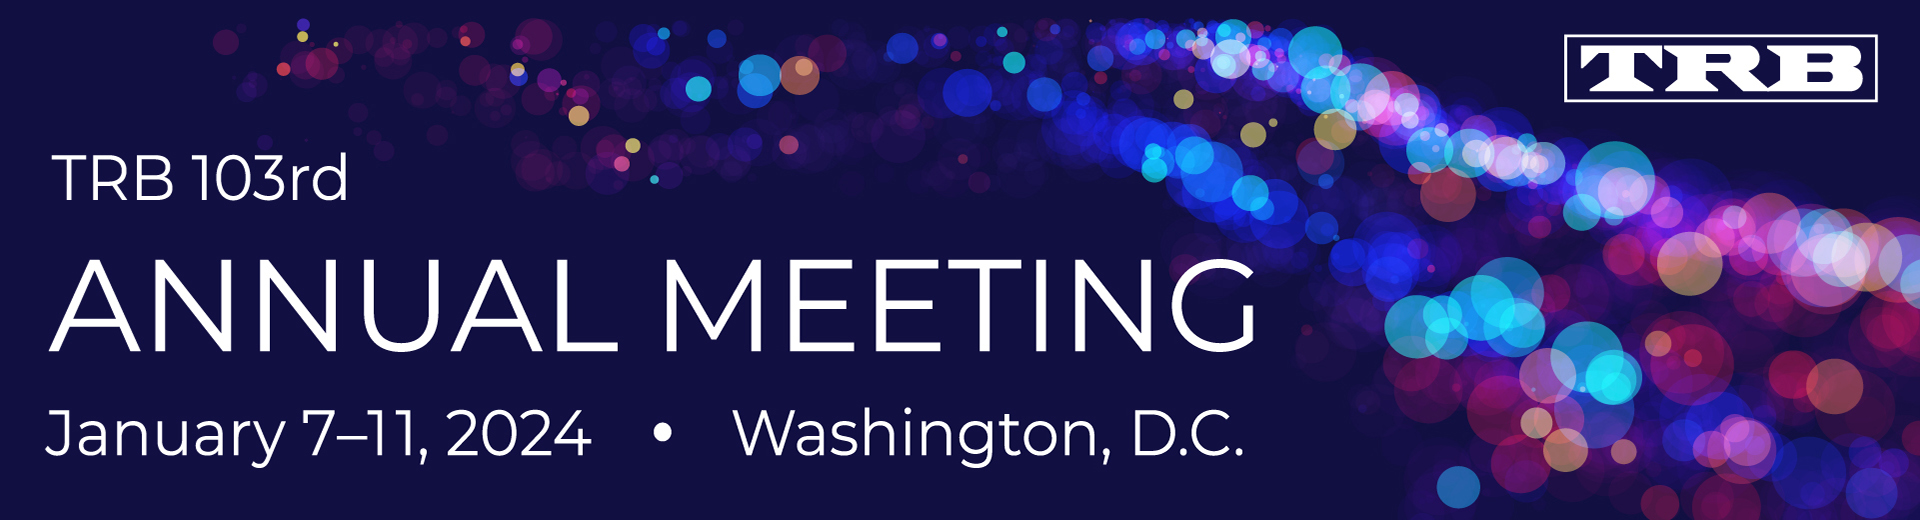 2024 BCHPA Semi-Annual Meeting - Spring into Action Tickets, Fri, 22 Mar  2024 at 8:30 AM